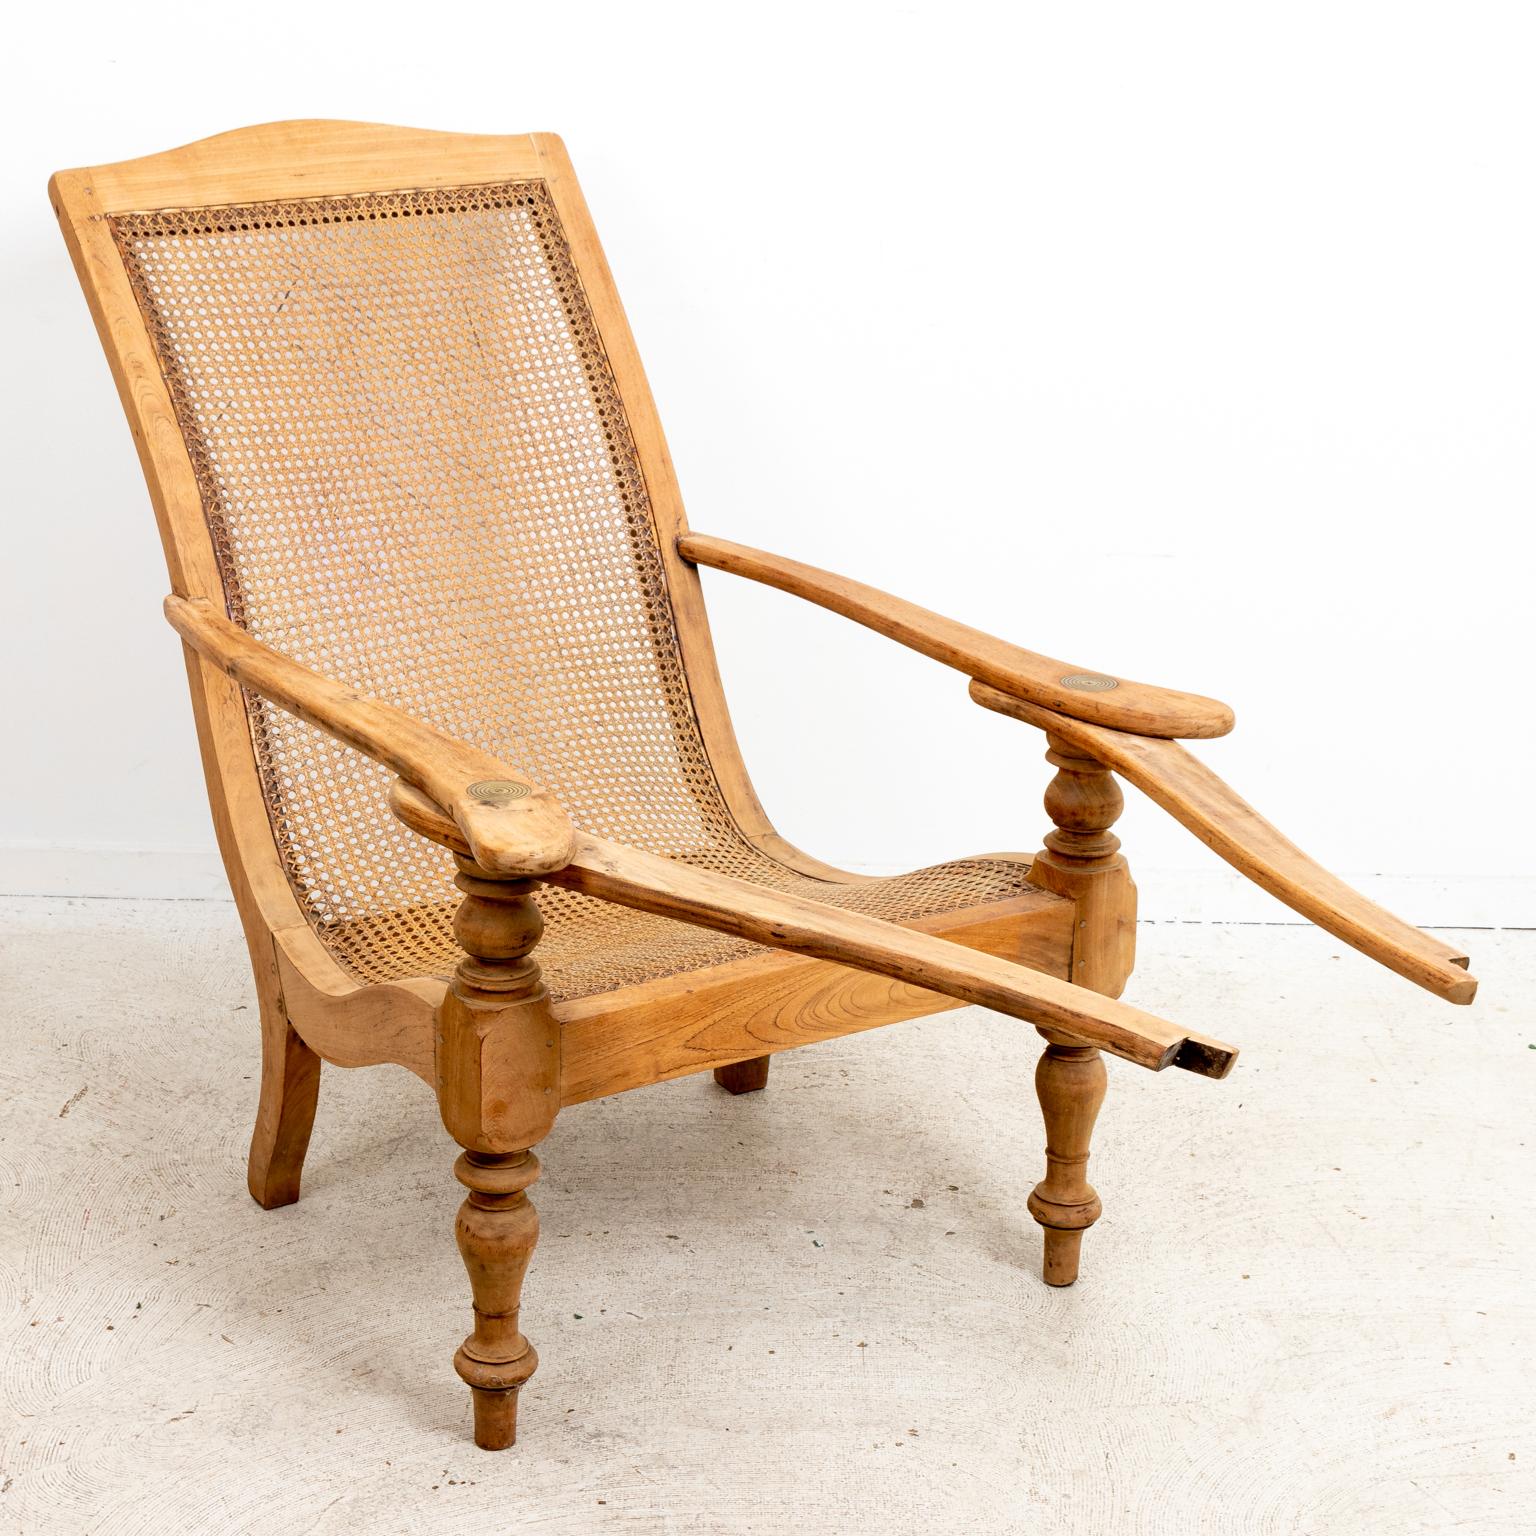 Cane Woven Plantation Armchair with Wood Frame 2